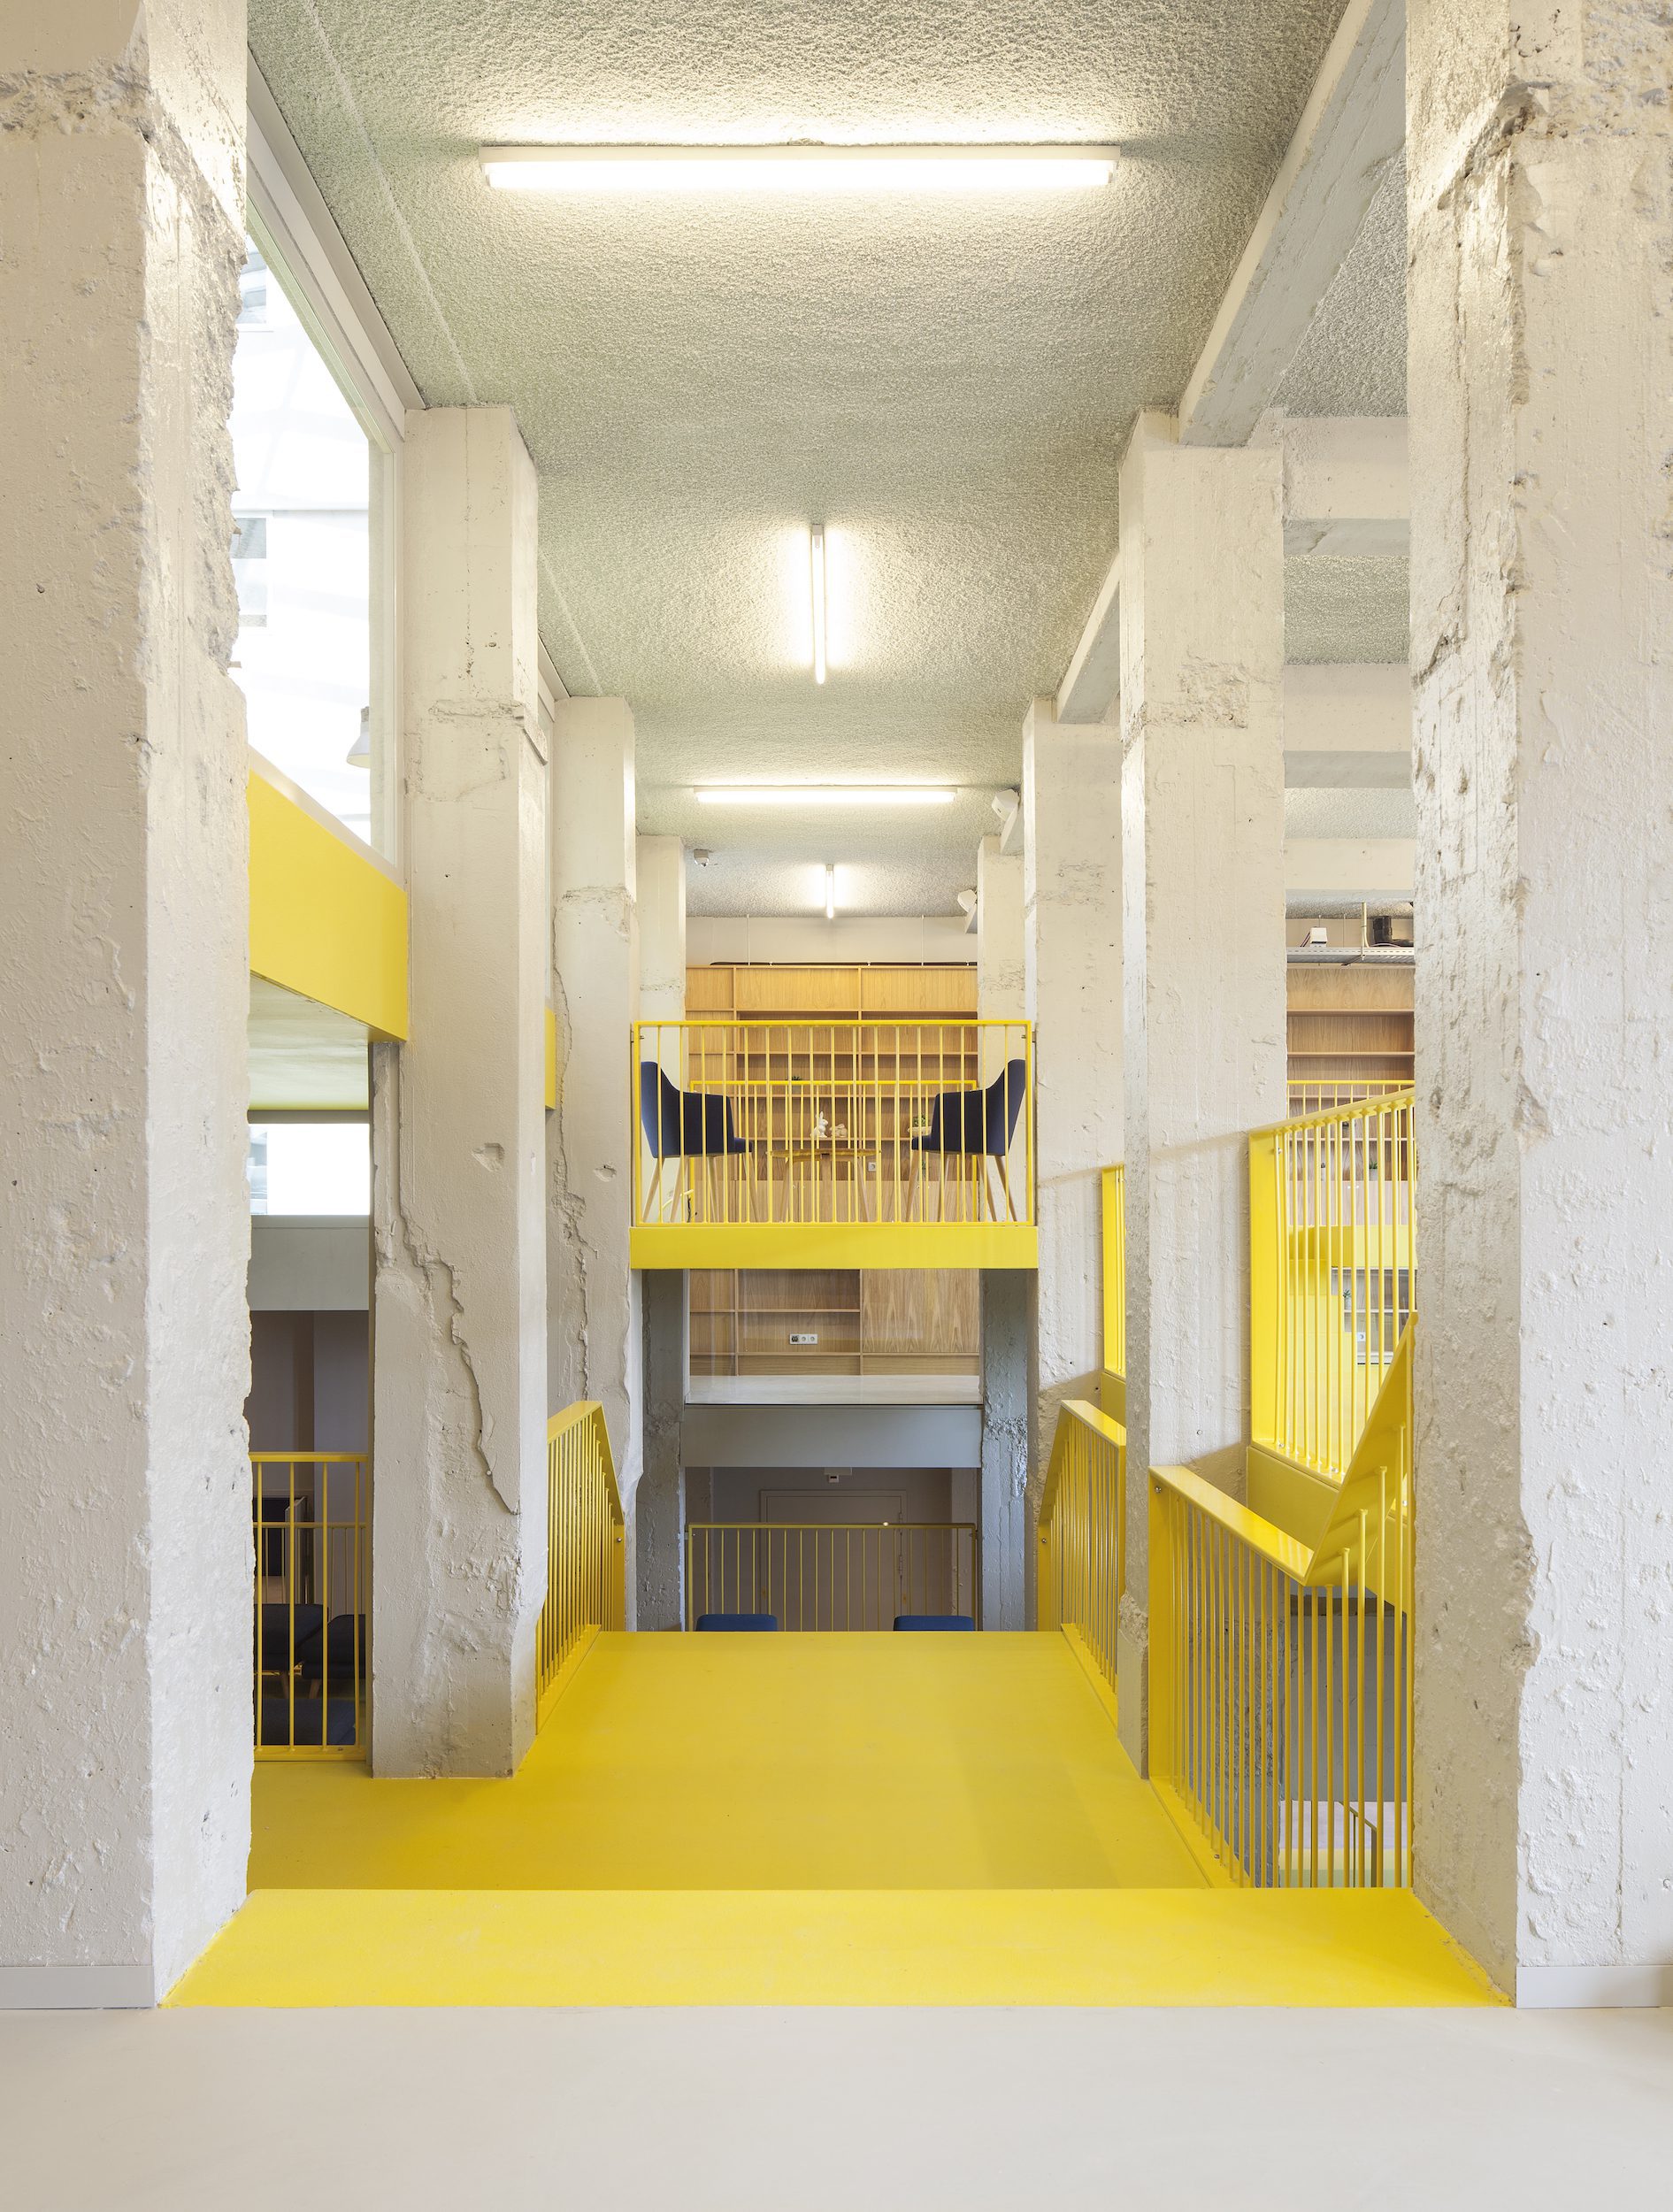 ClinkNOORD -  - a project by Space Encounters Office for Architecture